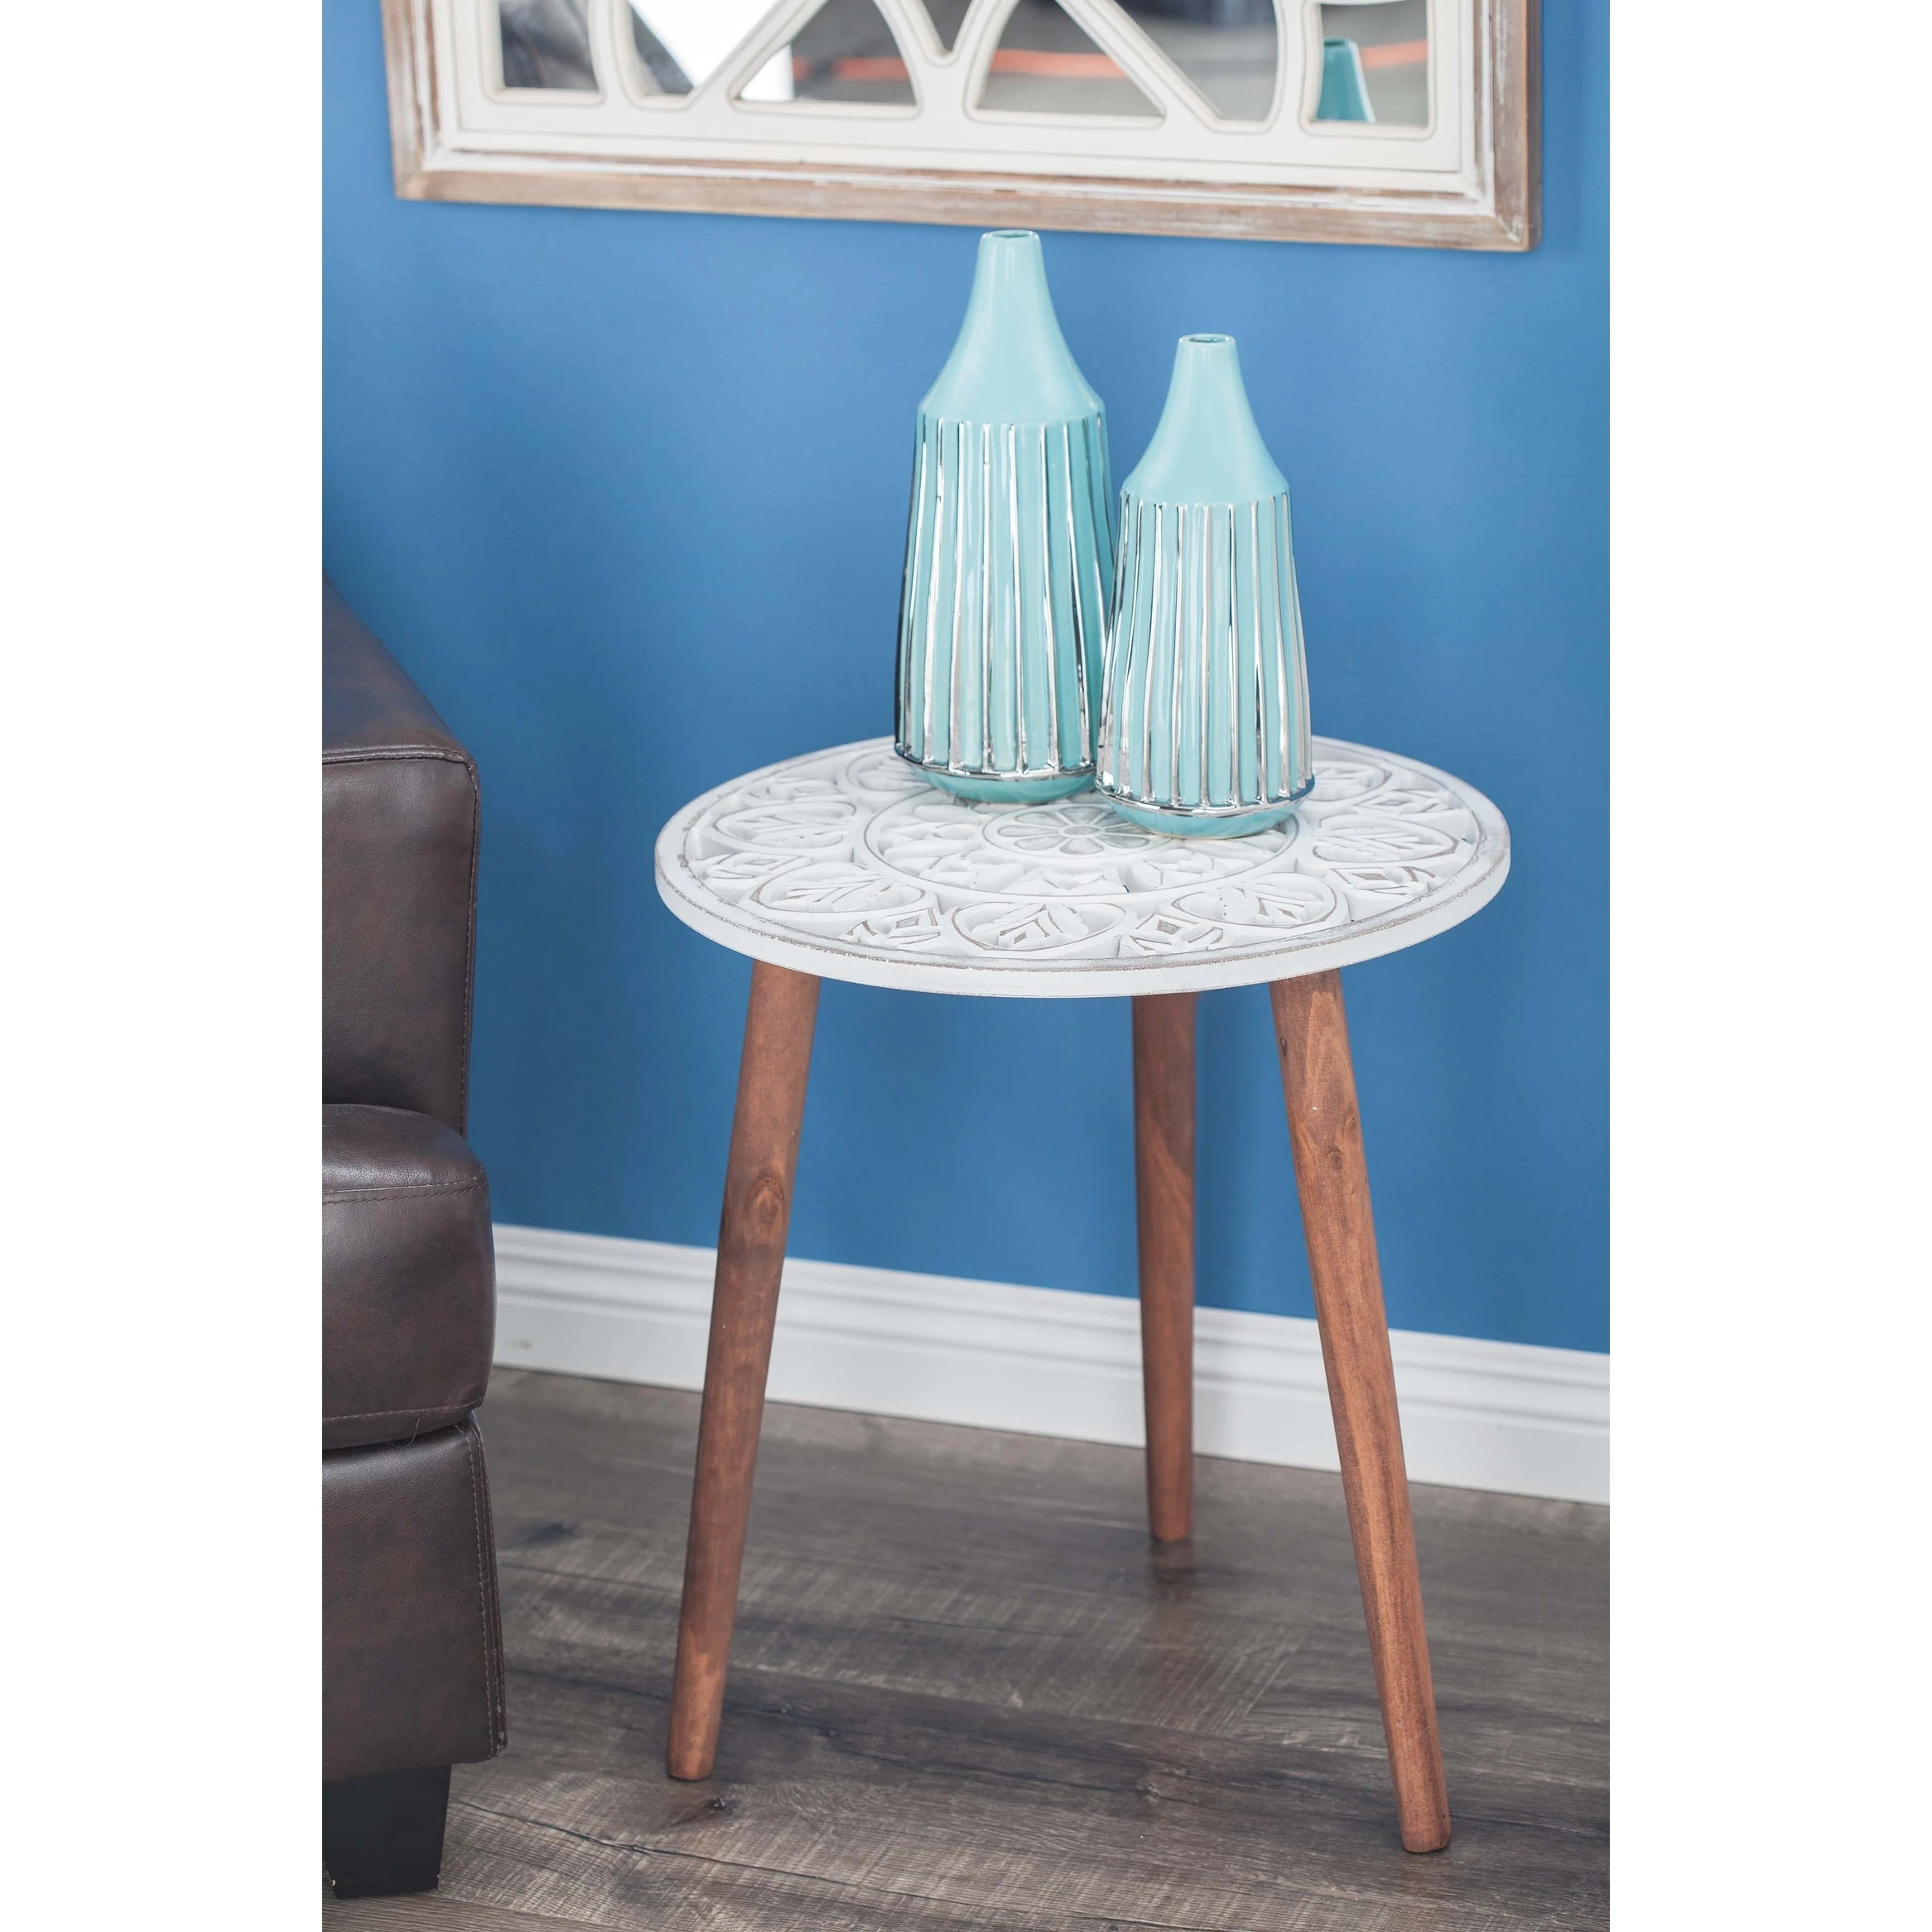 modern inch carved mandala design wooden accent table studio wood free shipping today trestle dining small side with shelves deck furniture set turquoise patio umbrella drink